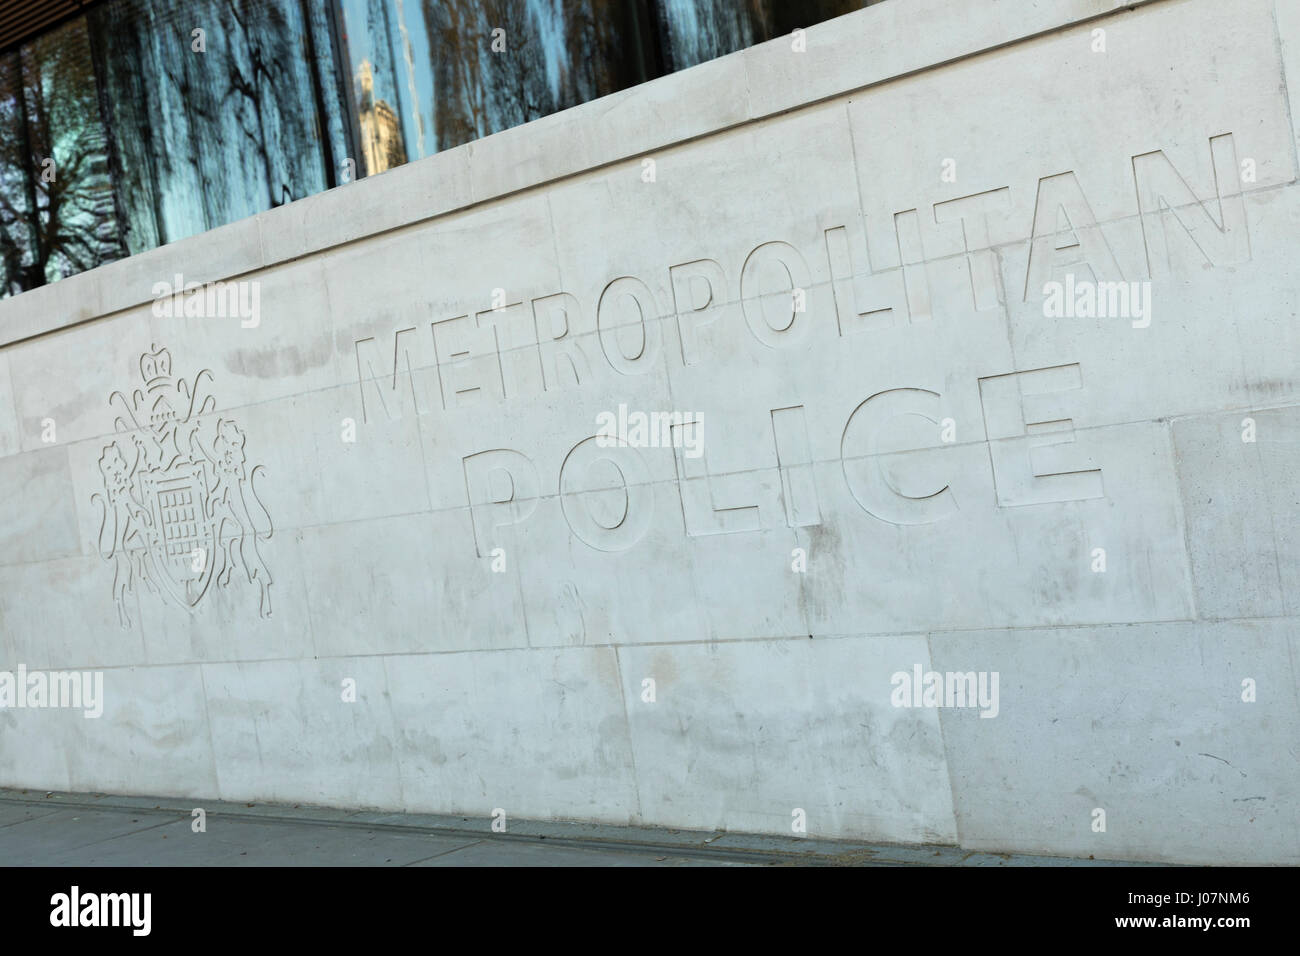 Metropolitan Police sign engraved on the stone wall at the front of New Scotland Yard, Westminster, London, UK Stock Photo